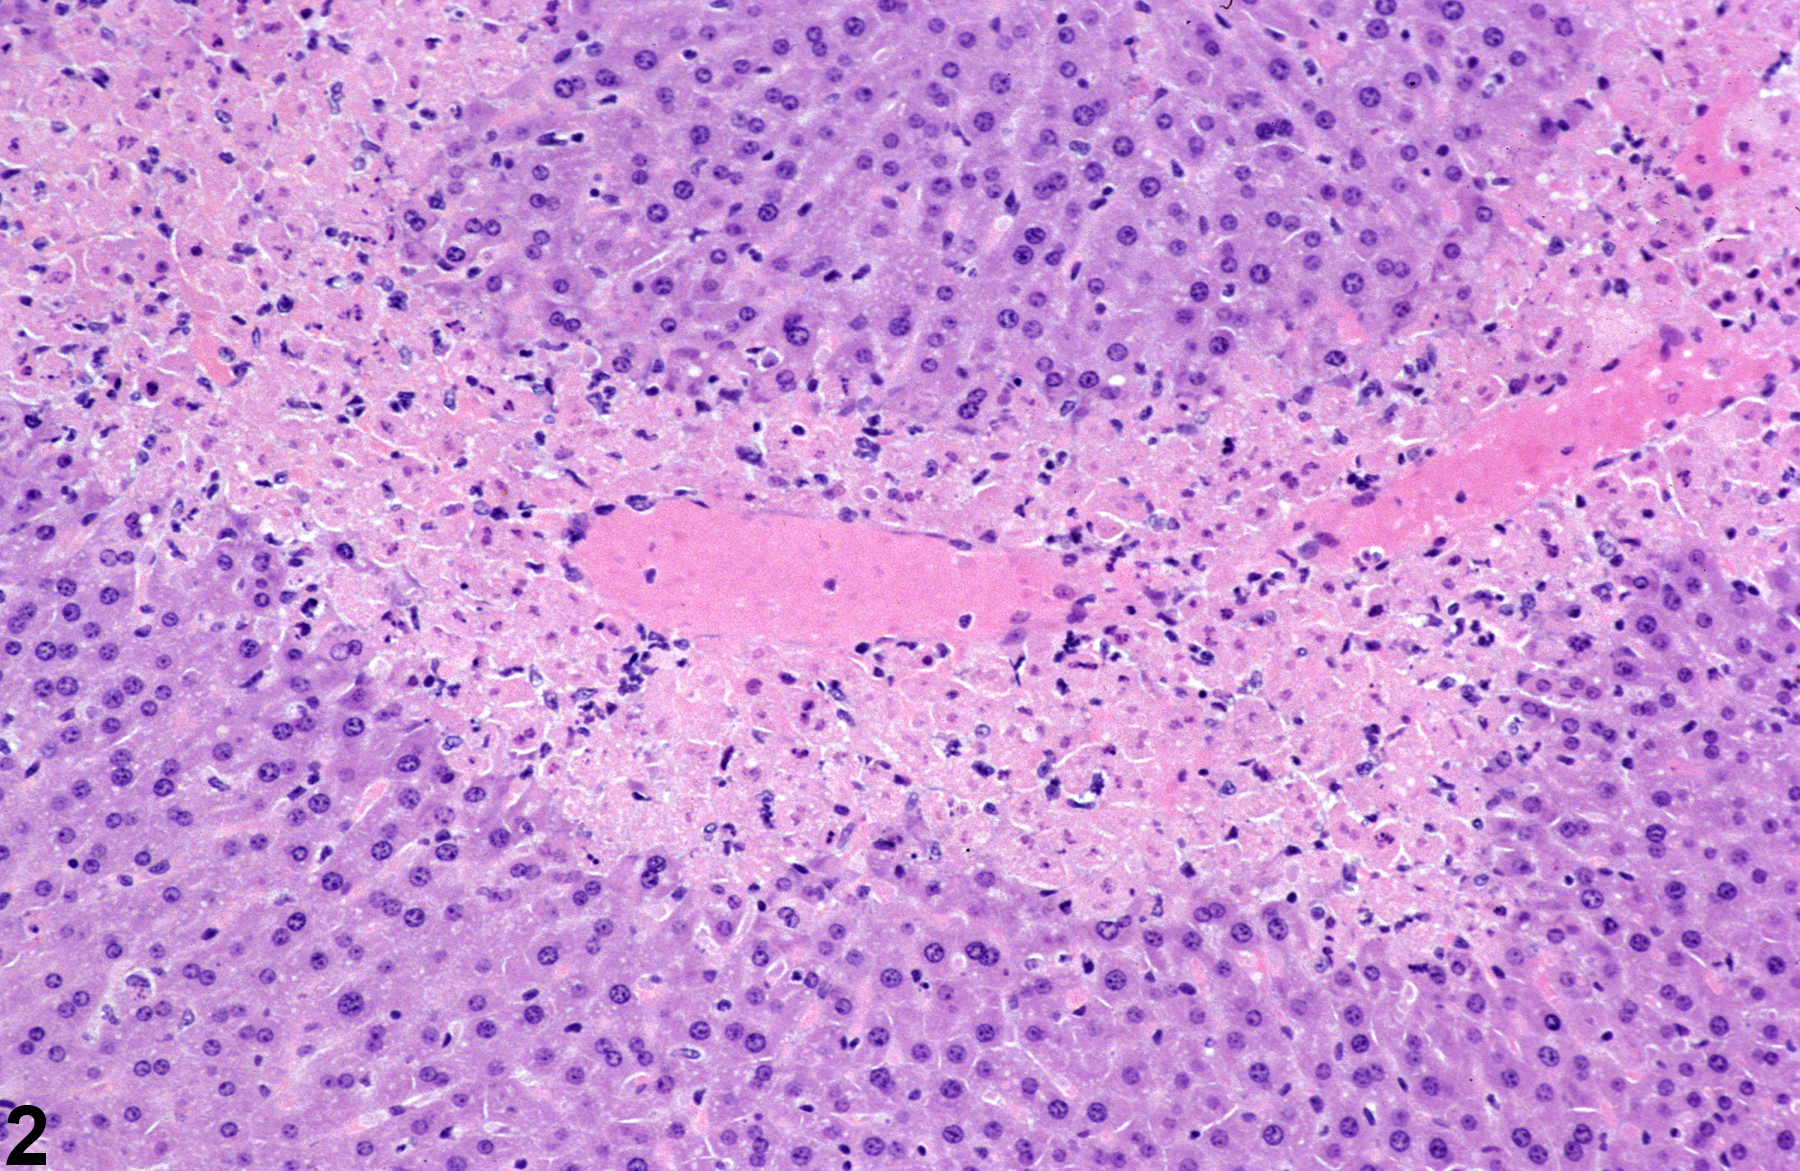 Image of necrosis in the liver from a male B6C3F1 mouse in a subchronic study